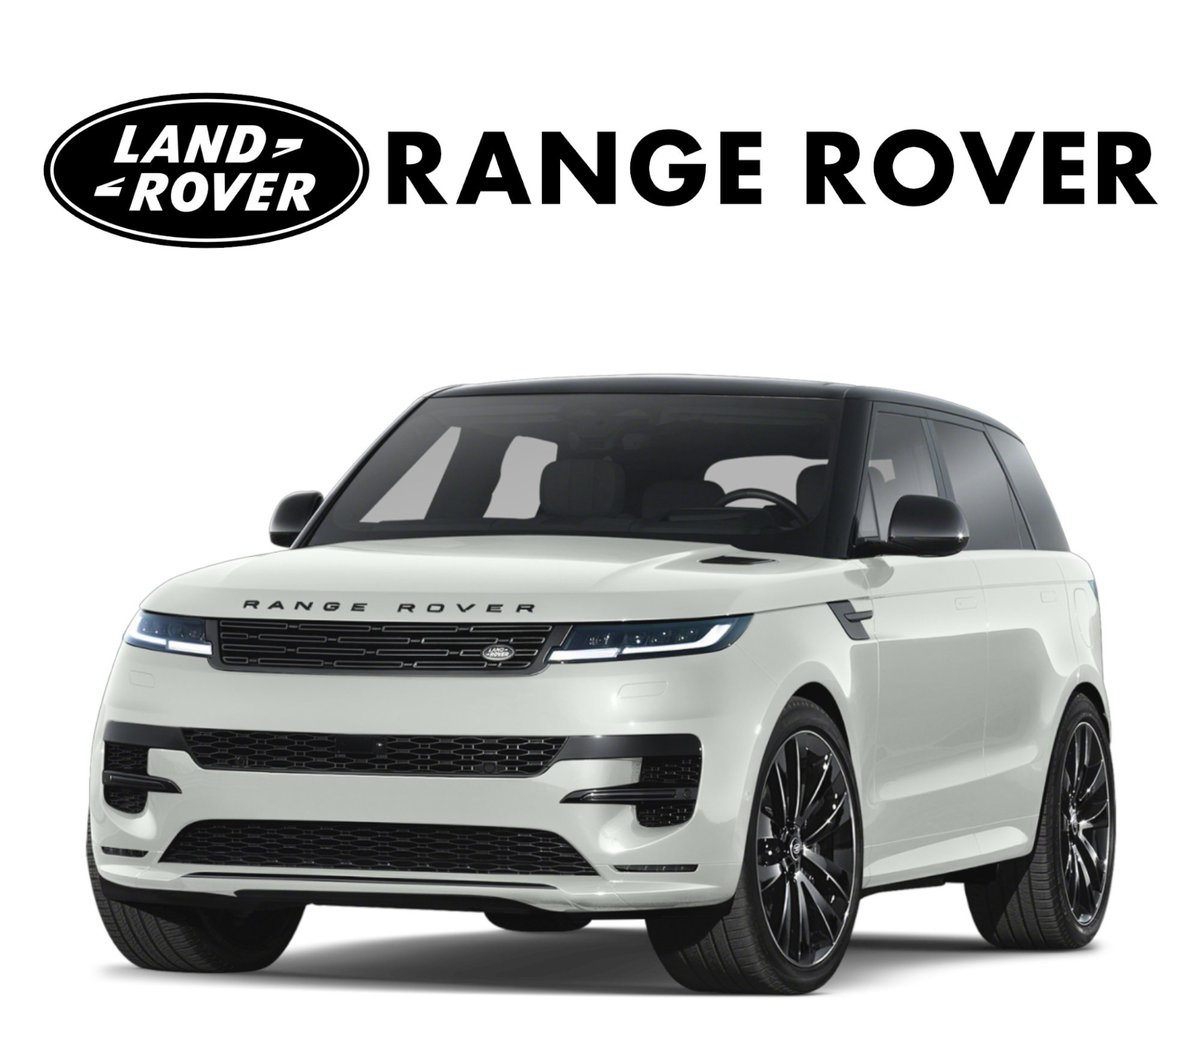 Land Rover (Range Rover) Car brand owned by Jaguar Land Rover. Jaguar Land Rover partners with TCS to open Open Innovation Programme in Israel #FreePalestine #BoycottIsrael #BoycottIsraeliProducts